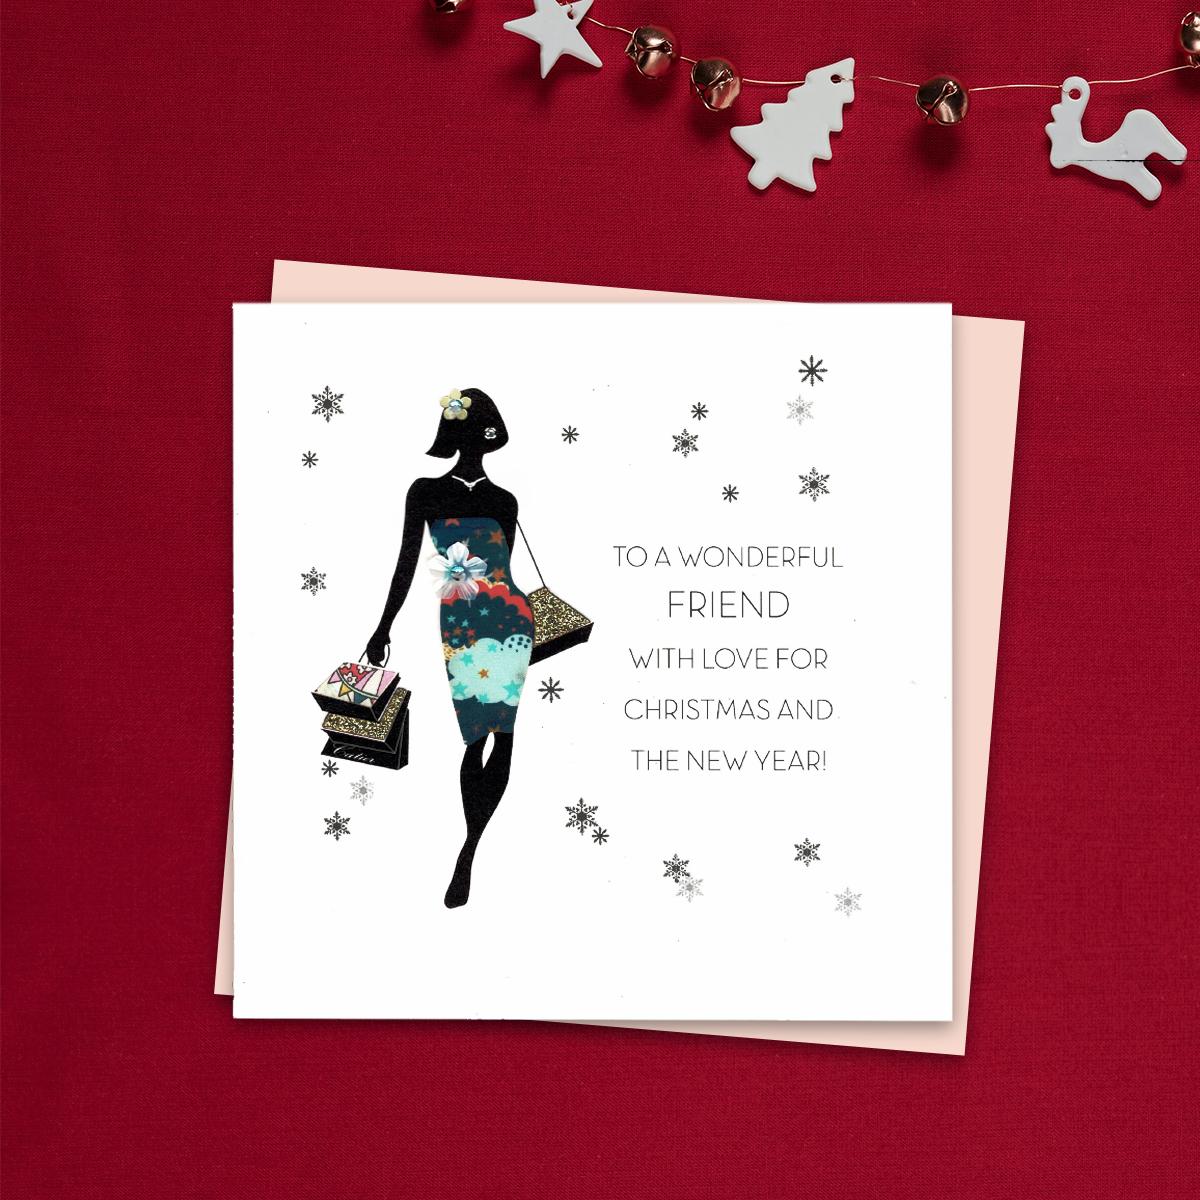 To A Wonderful Friend With love For Christmas And The New Year Featuring A Lady In Silhouette With Decoupage Dress , Carrying Shopping. This Beautiful Handcrafted Card Is Finished With Gold Glitter Accents And Jewel Embellishments. Blank inside For Own Message . With Blush Pink Envelope